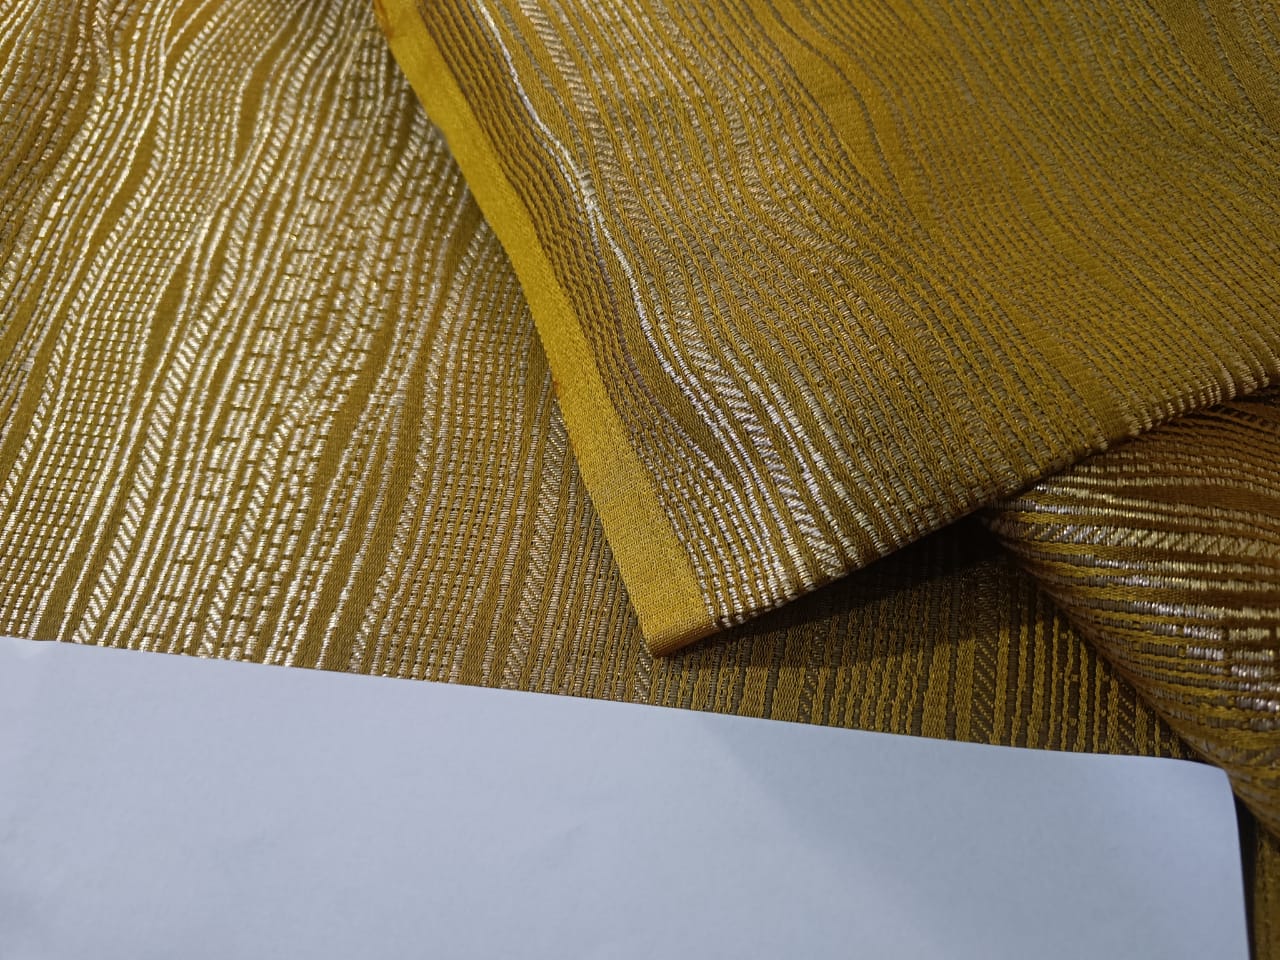 Brocade fabric metallic gold abstract lines 44" wide BRO893[4/5]available in 2 colors navy and mustard gold